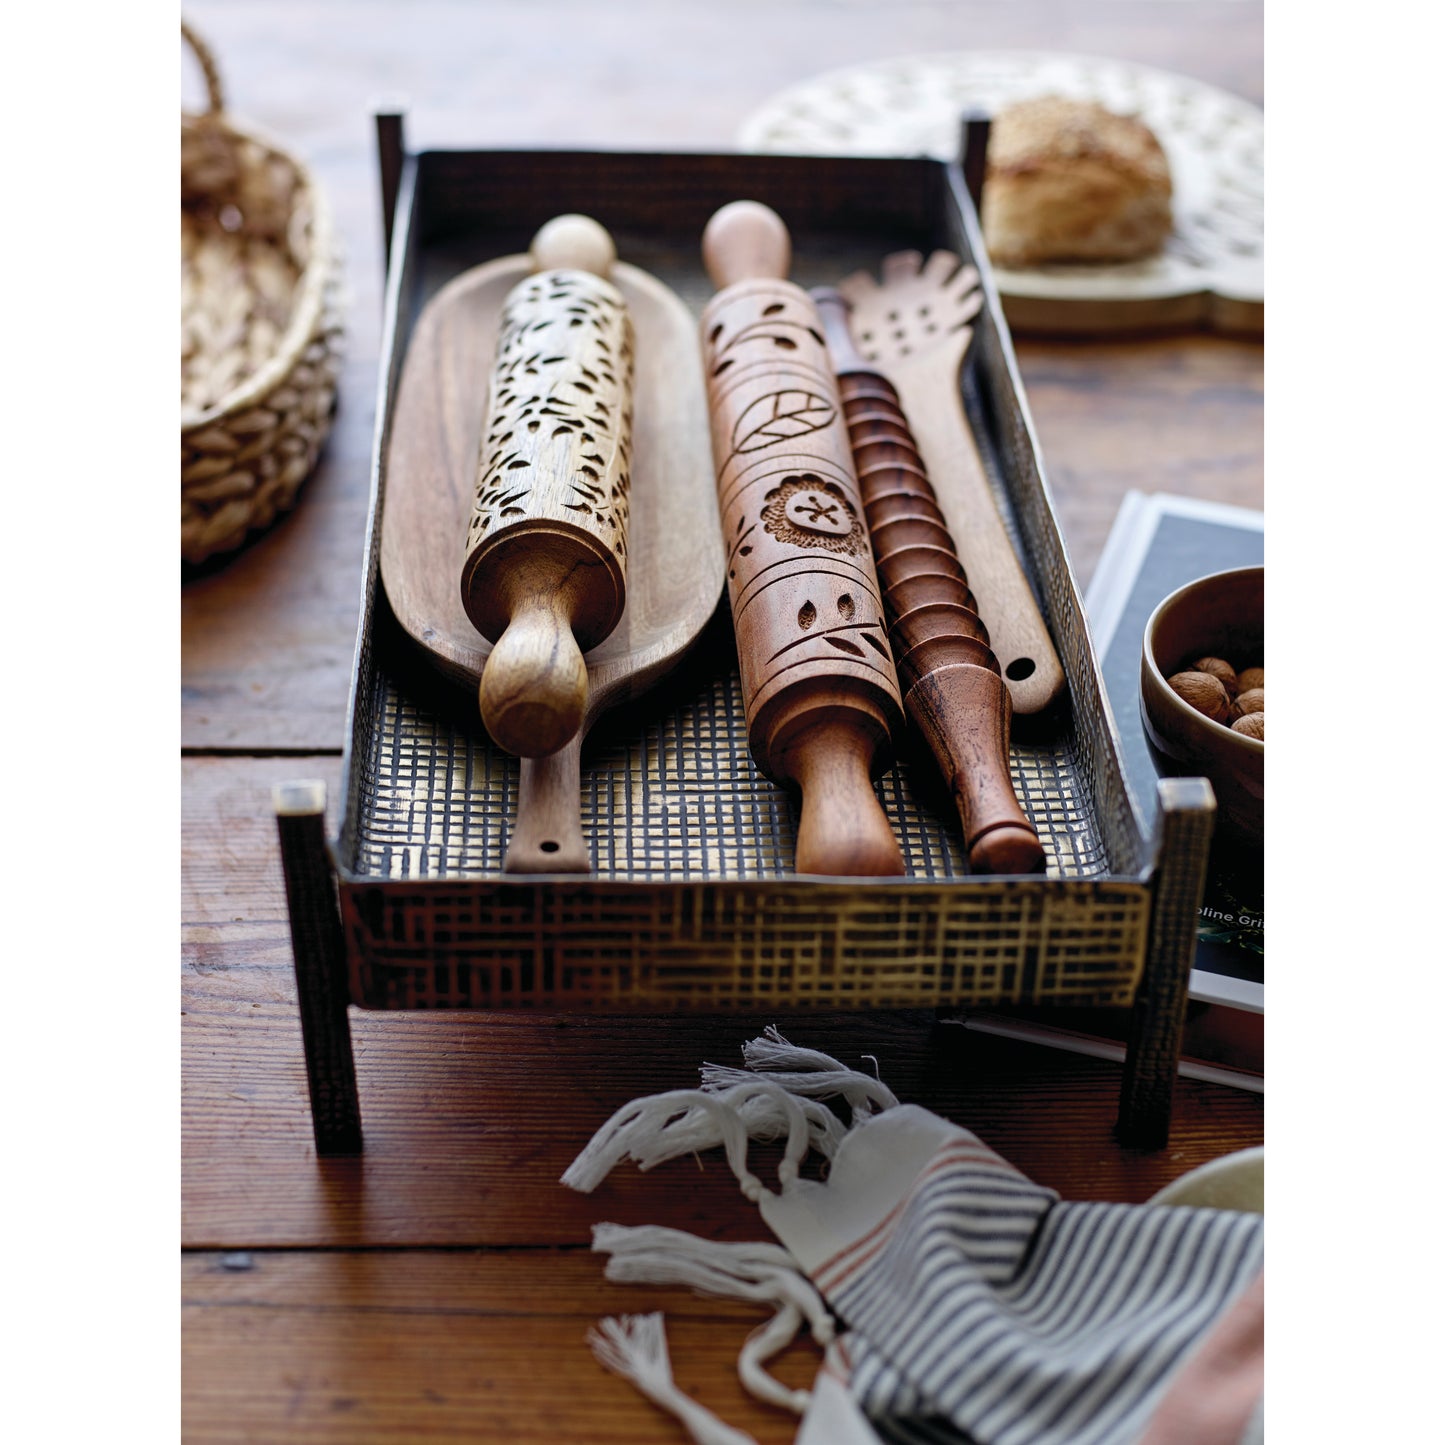 Hand-Carved Wood Rolling Pin